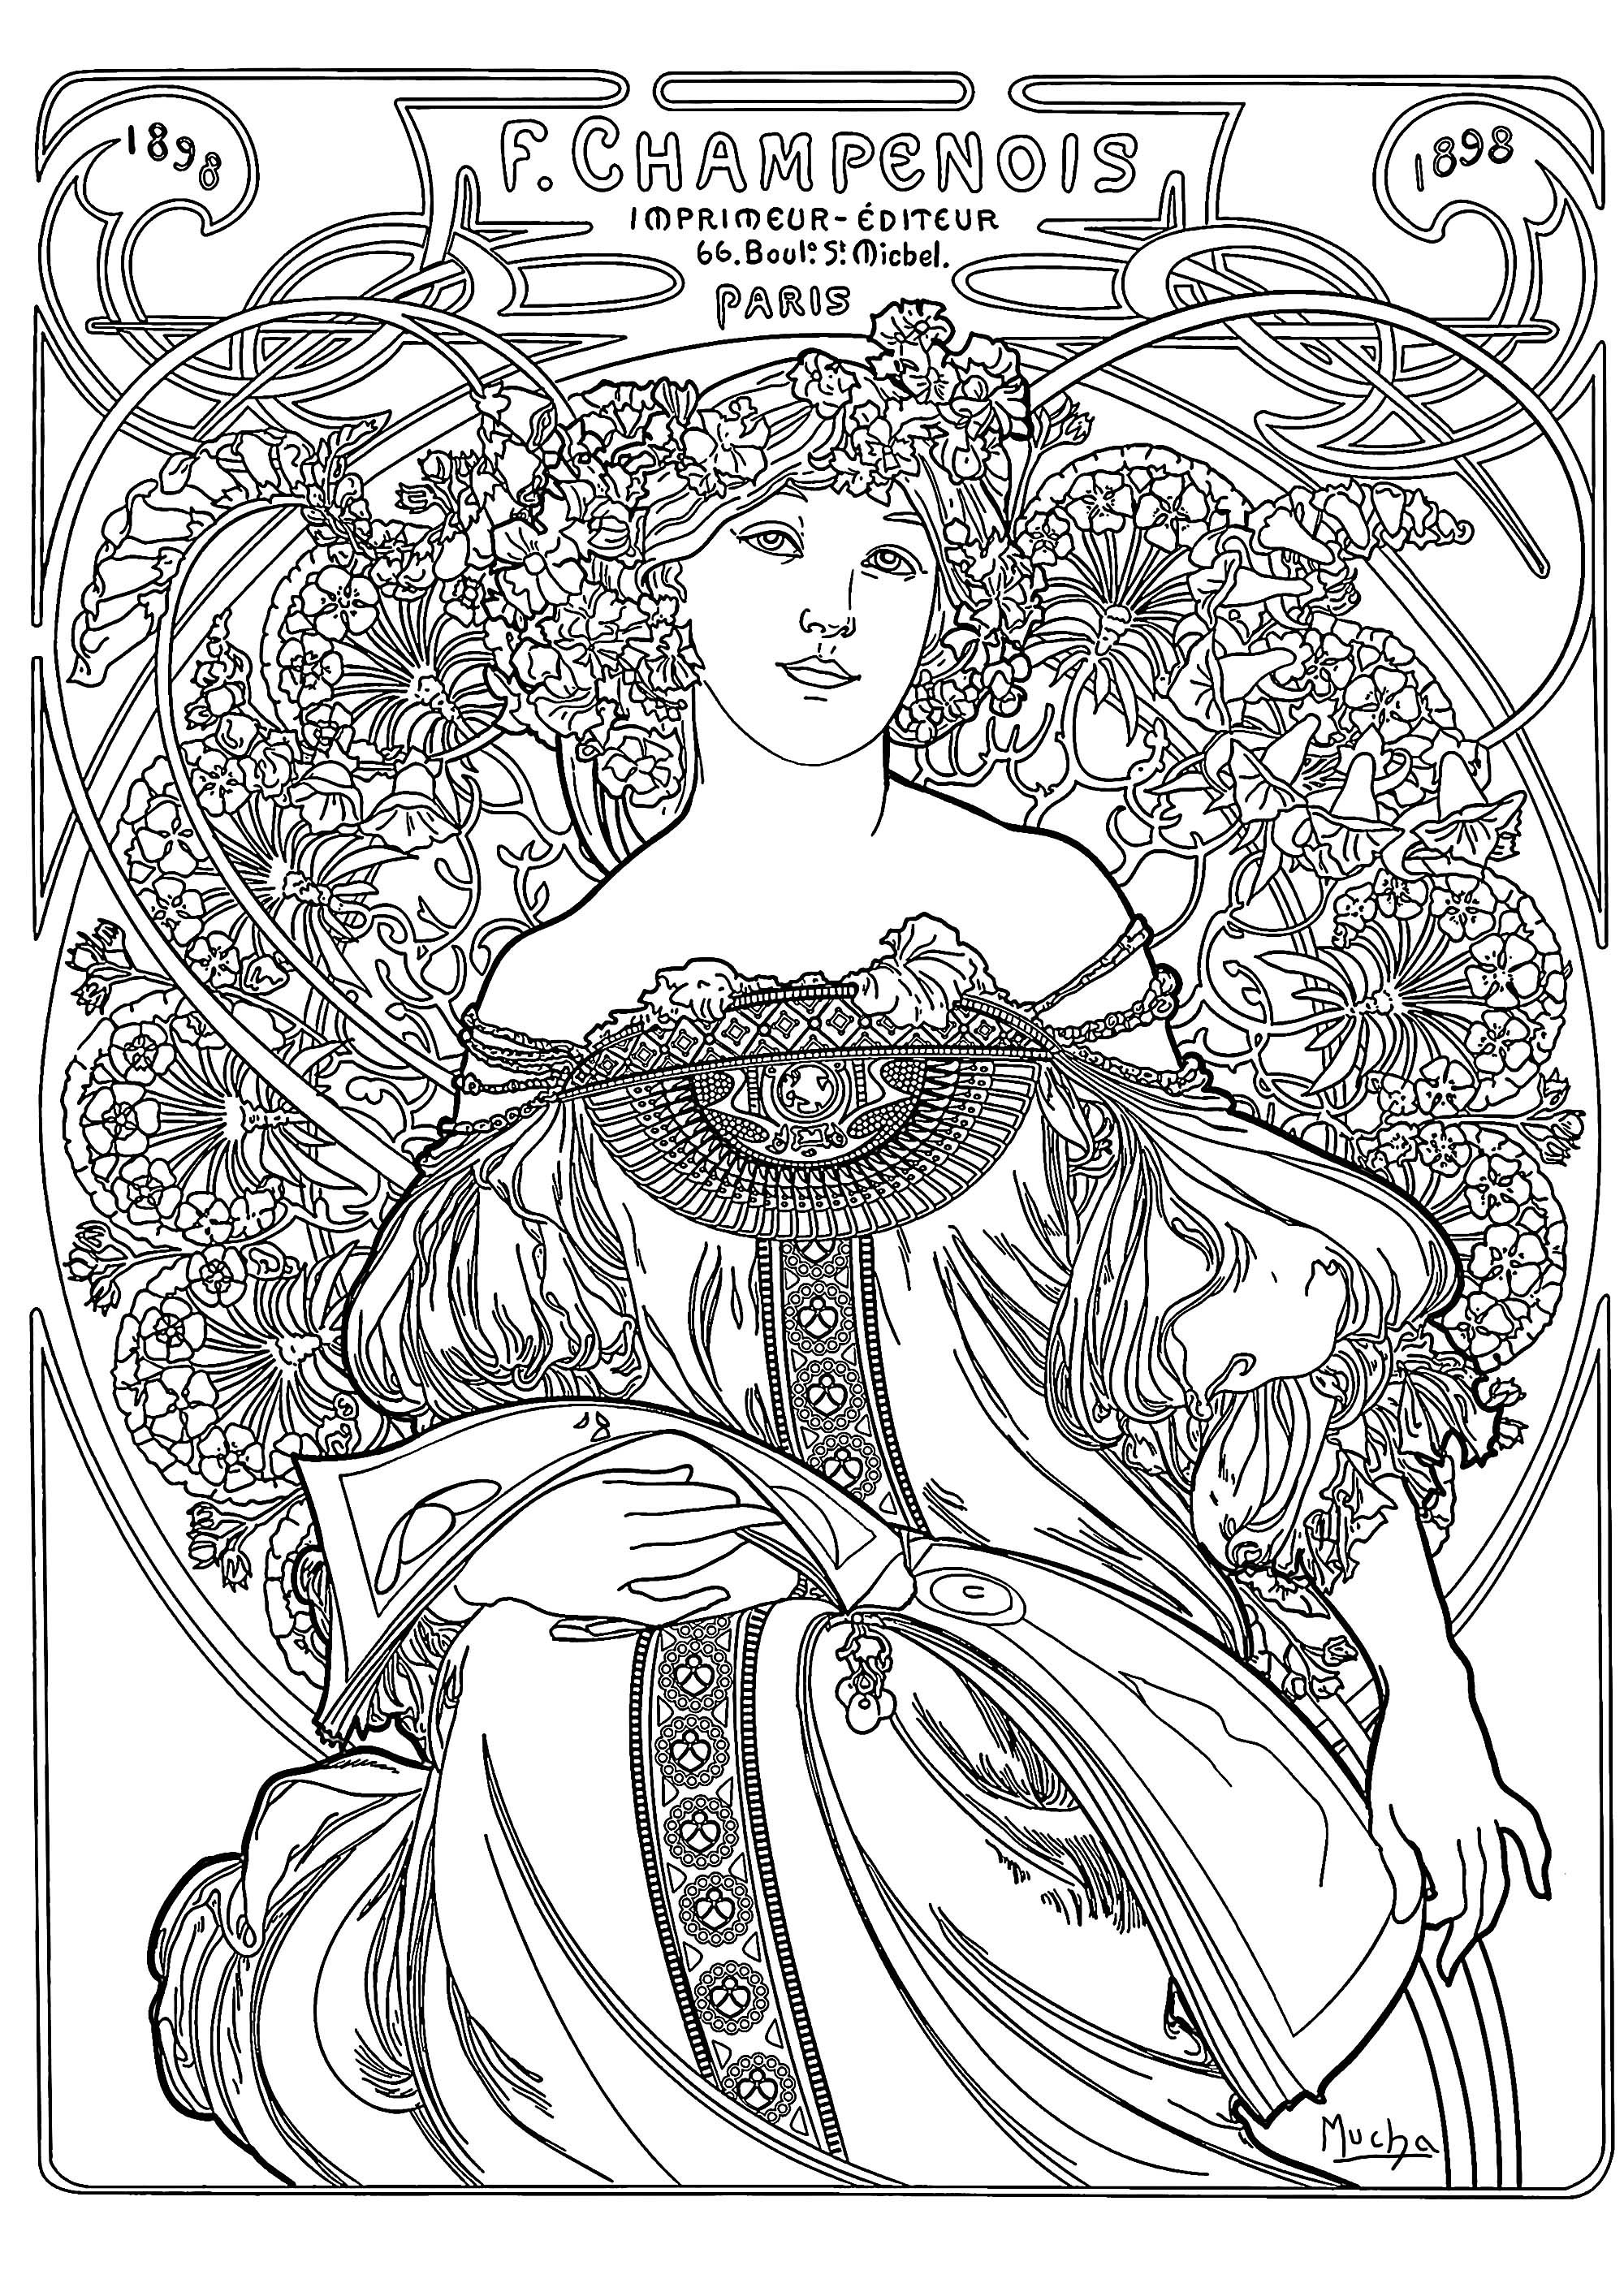 Coloring based on an advertising poster created in 1897 by Alfons Mucha for the Parisian printer Champenois. This coloring depicts a woman in a long, flowing dress with floral motifs surrounding her in an elegant circular form.As with all Alfons Mucha's creations, the details and lines are very fine and delicate.We advise you to use pastel colors to achieve a soft, serene atmosphere in your creation, Artist : Art. Isabelle